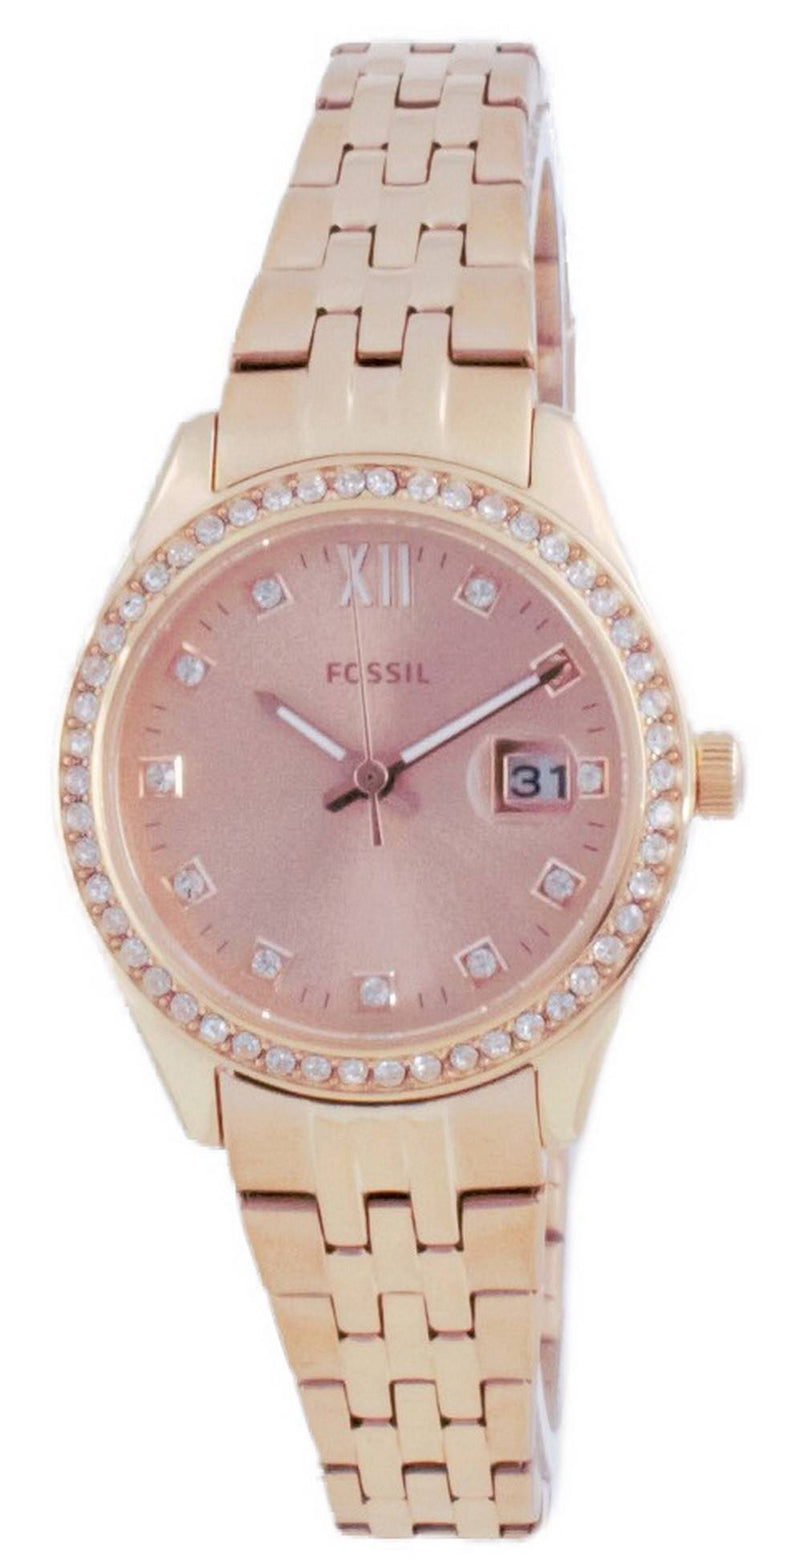 Fossil Scarlette Micro Rose Gold Stainless Steel Crystal Quartz ES5038 Women's Watch